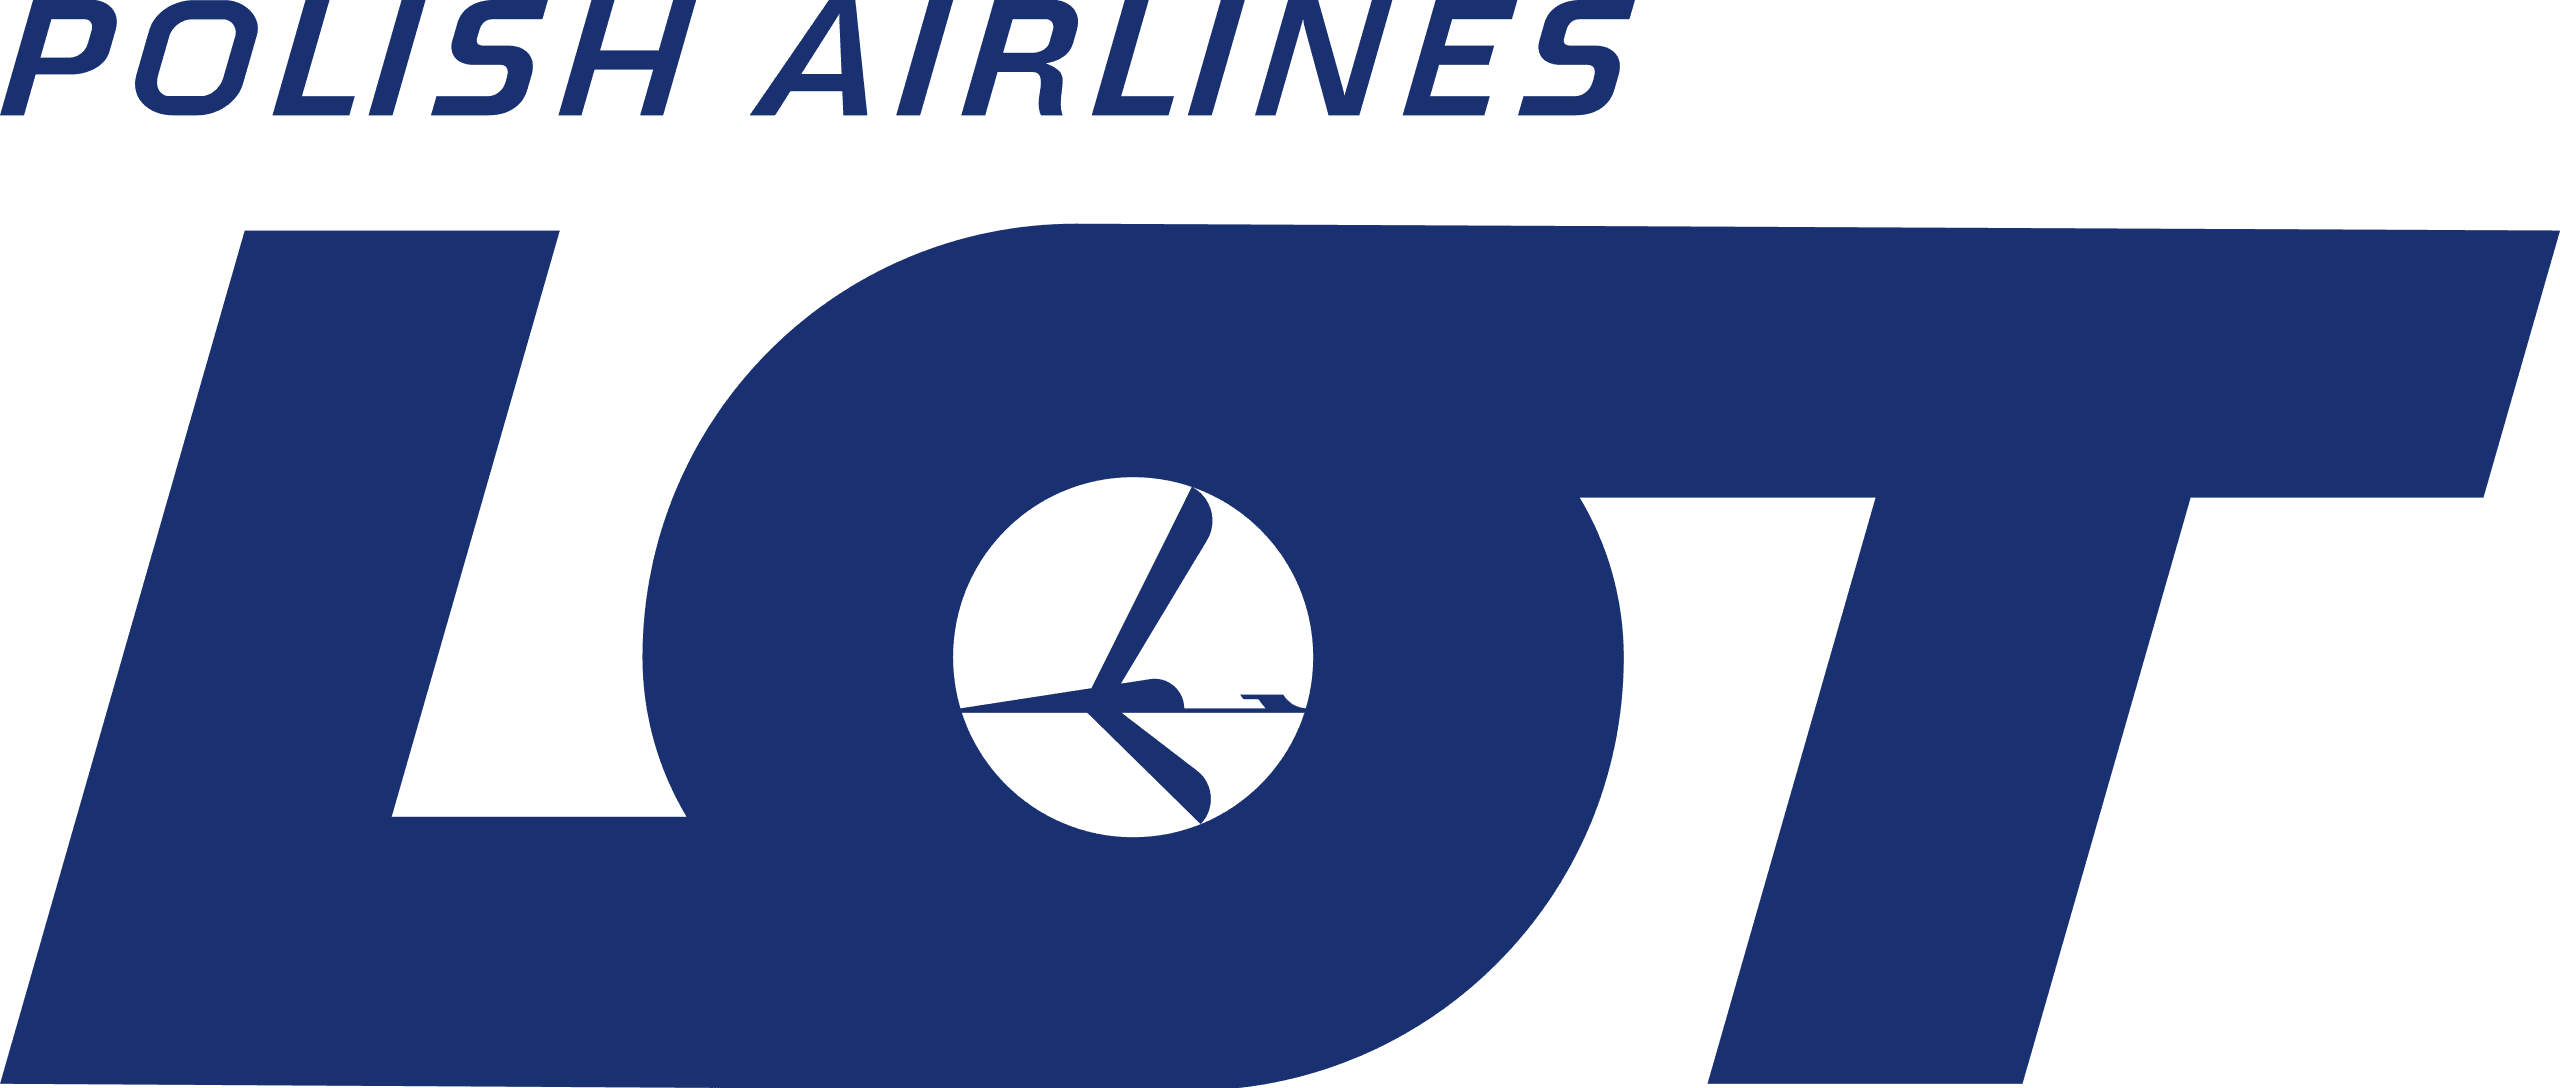 lot airlines logo